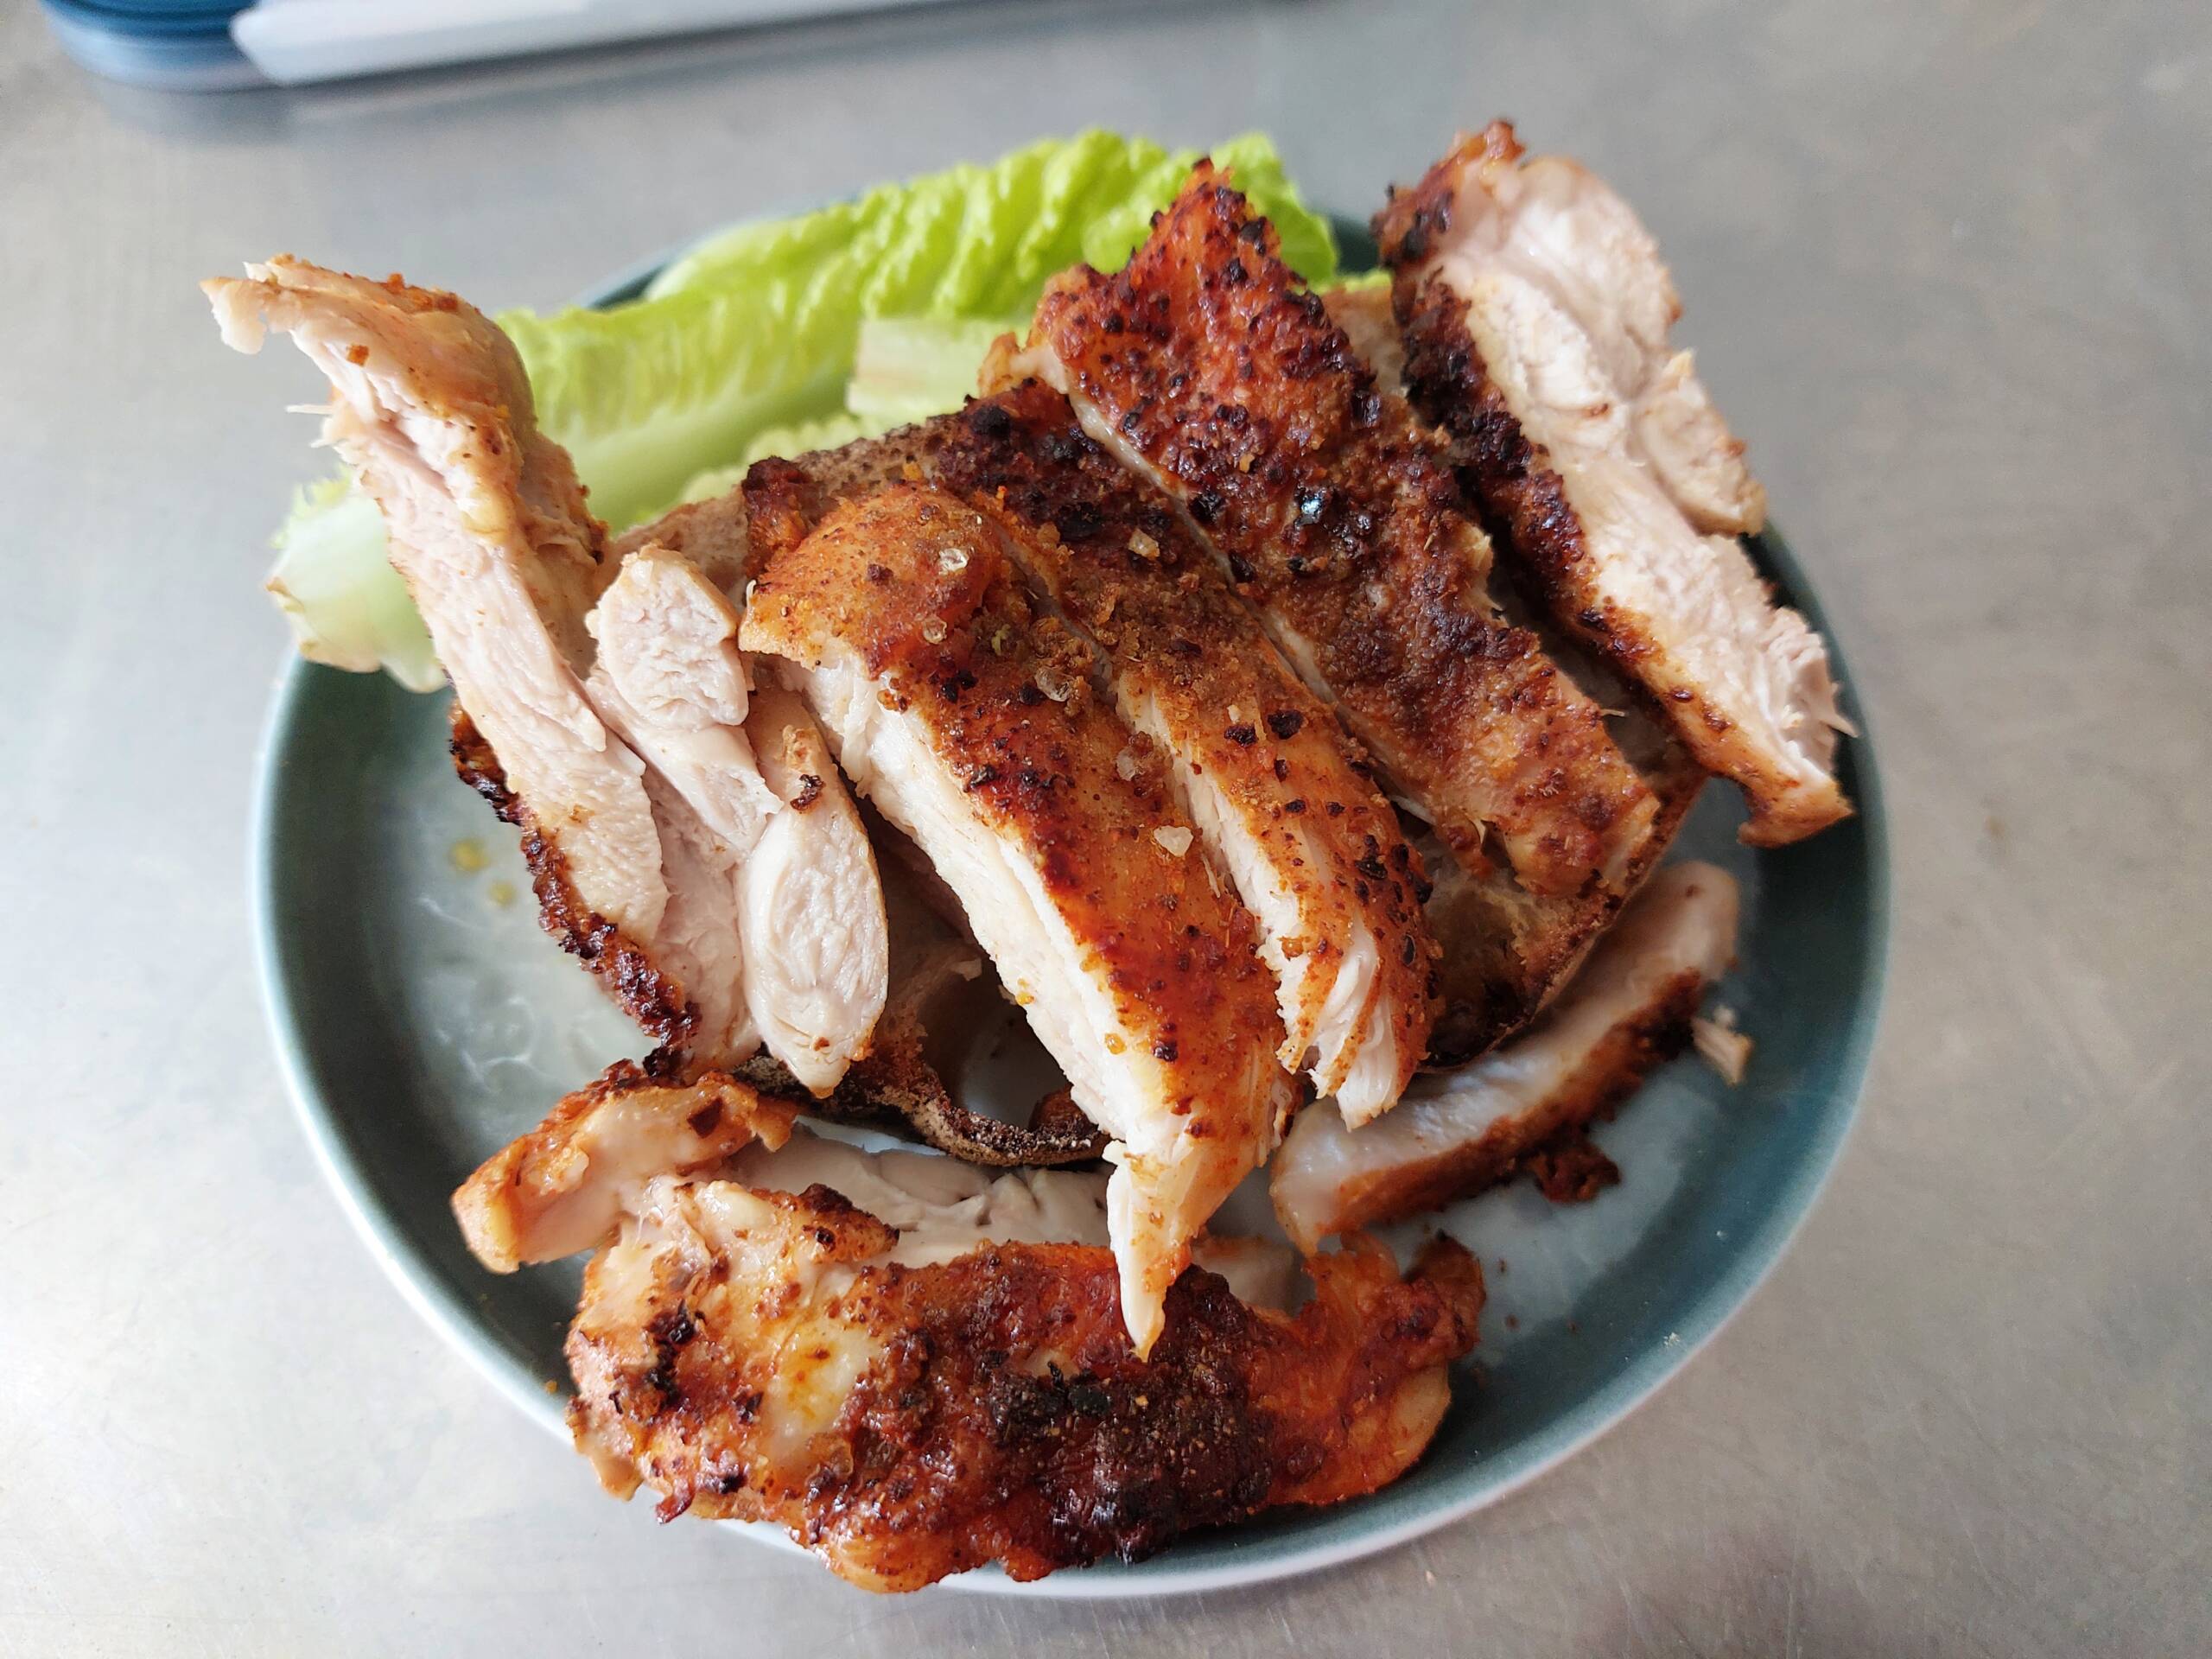 seared and seasoned chicken breast, resting on a bed of crisp, fresh lettuce